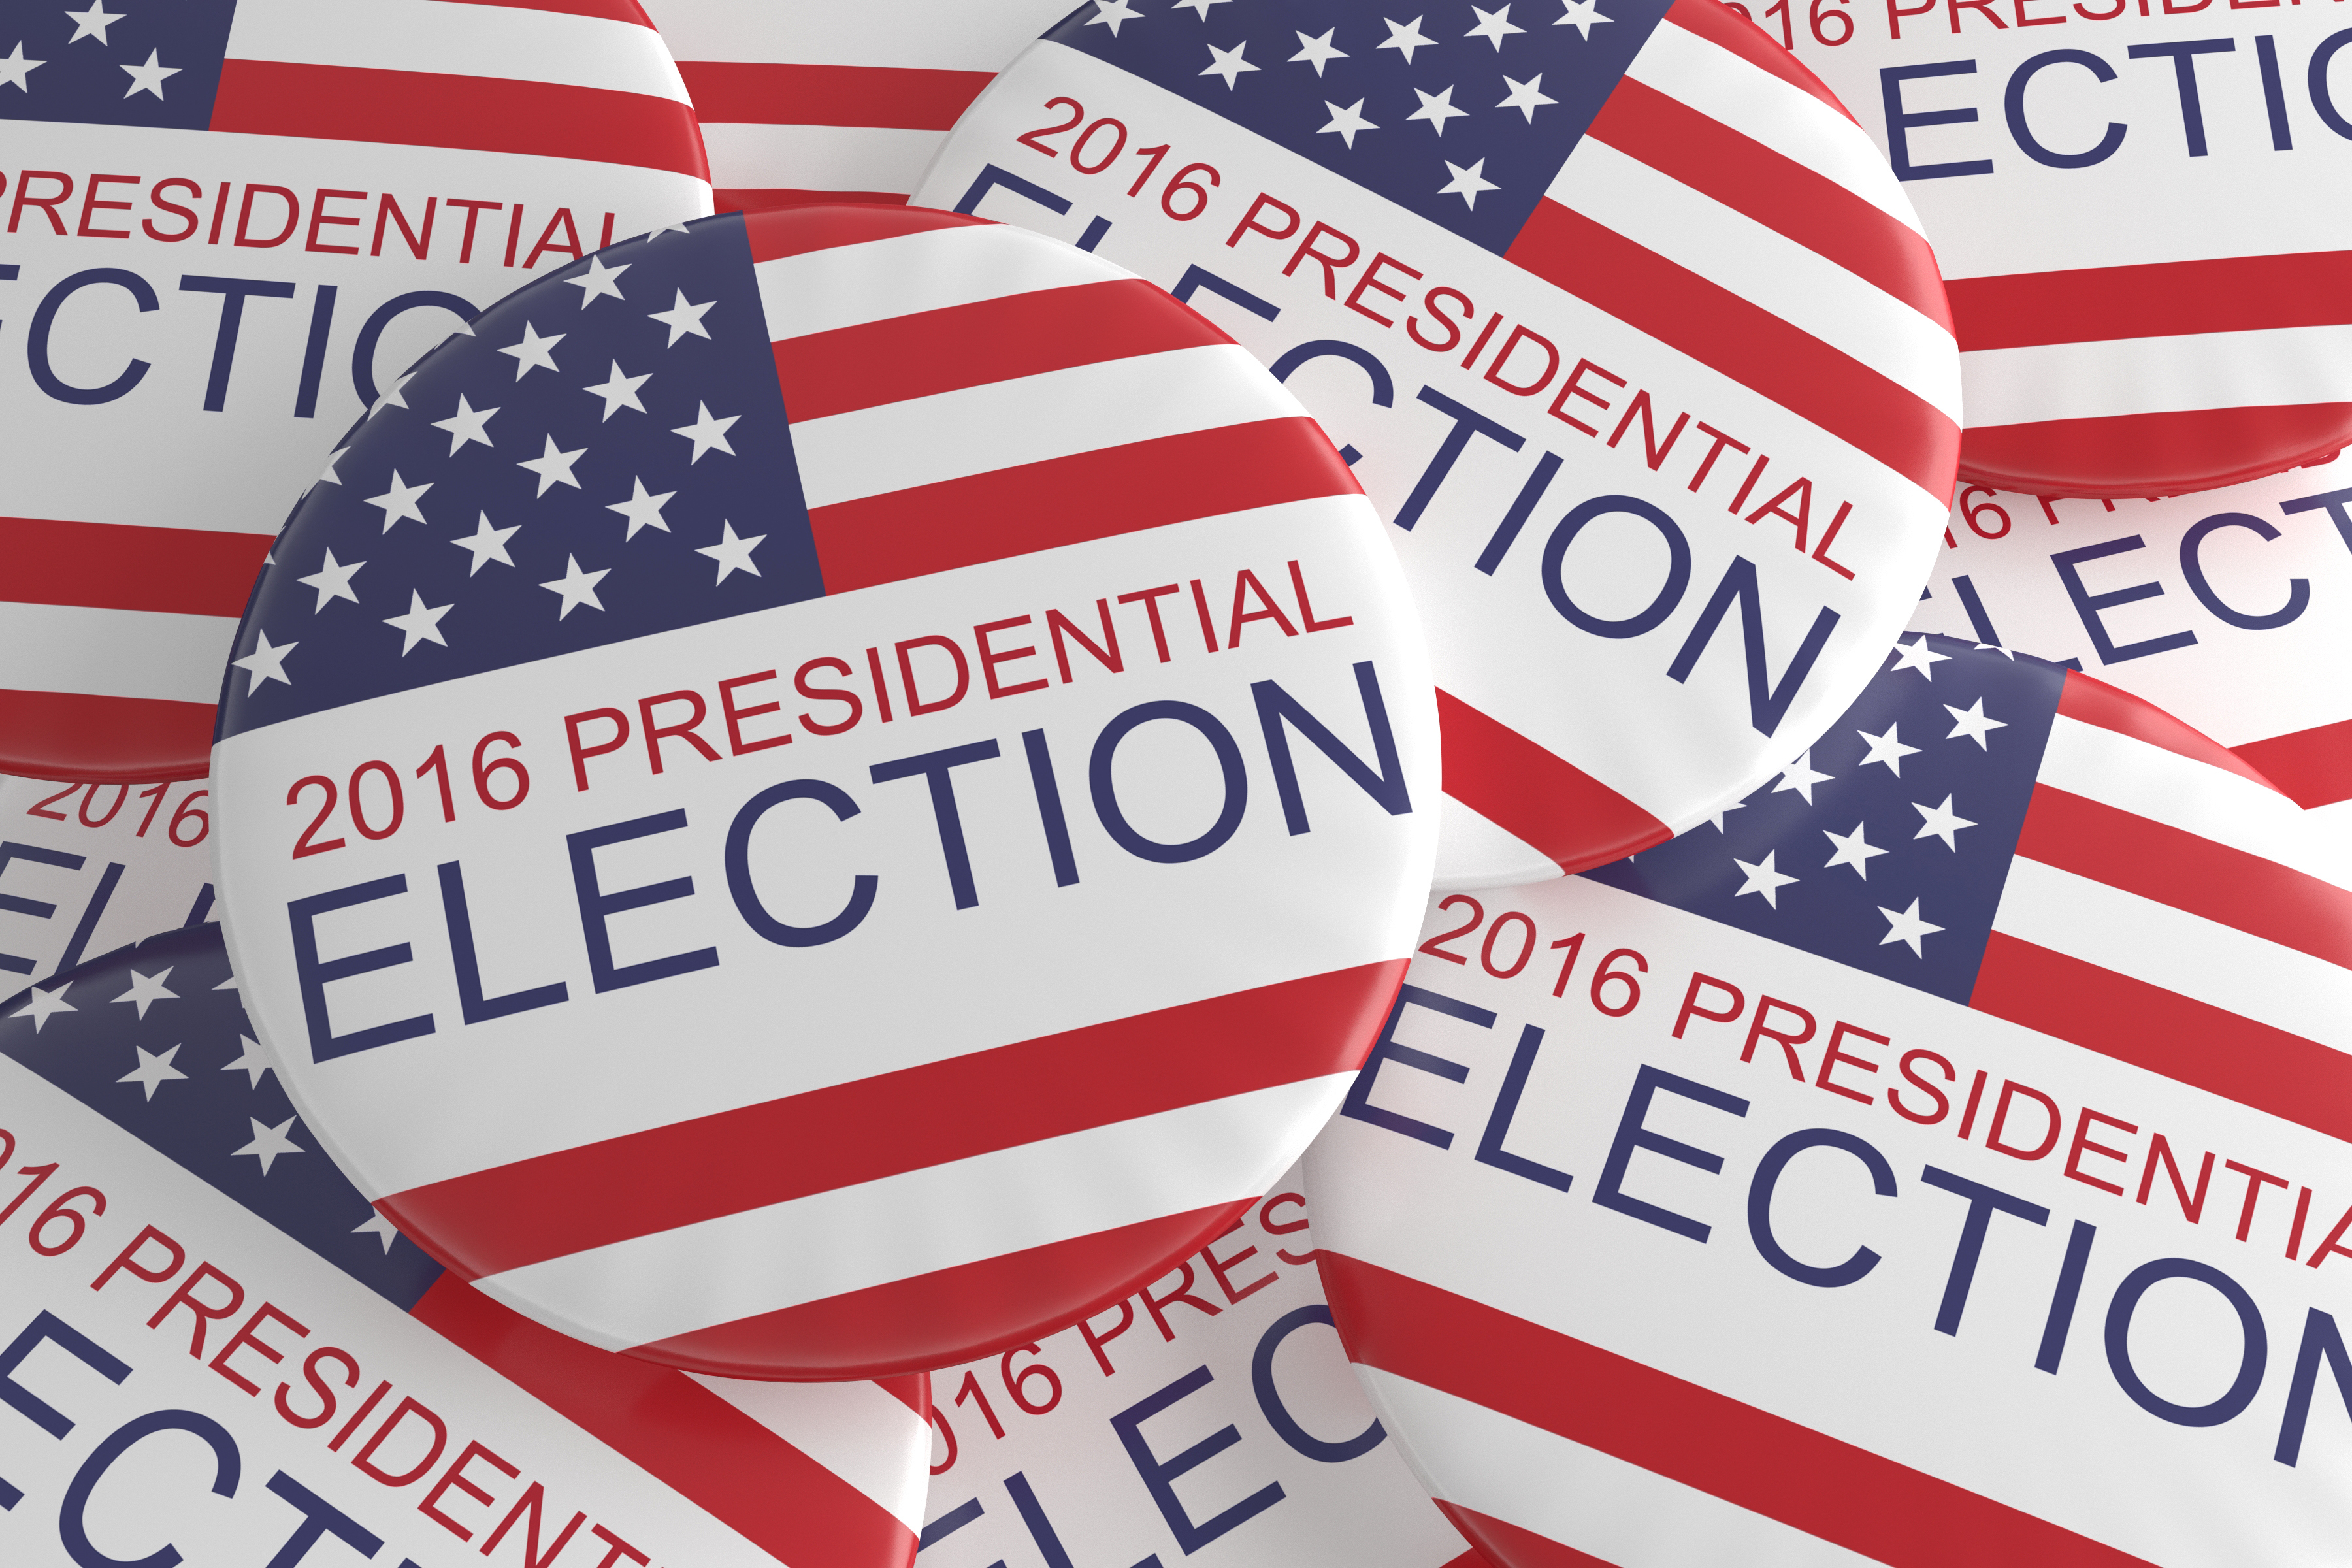 Presidential election 2016 buttons